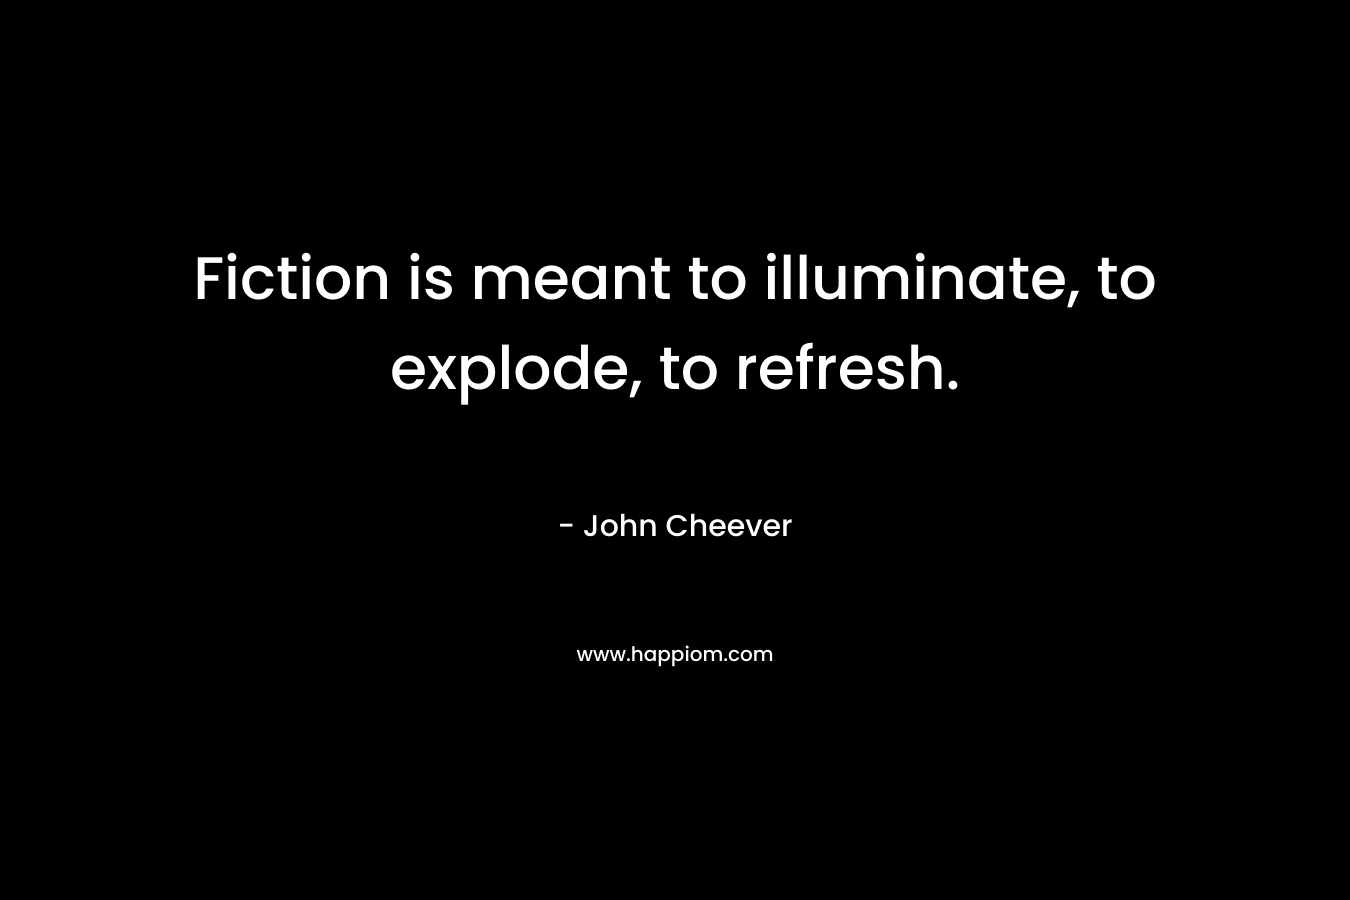 Fiction is meant to illuminate, to explode, to refresh. – John Cheever